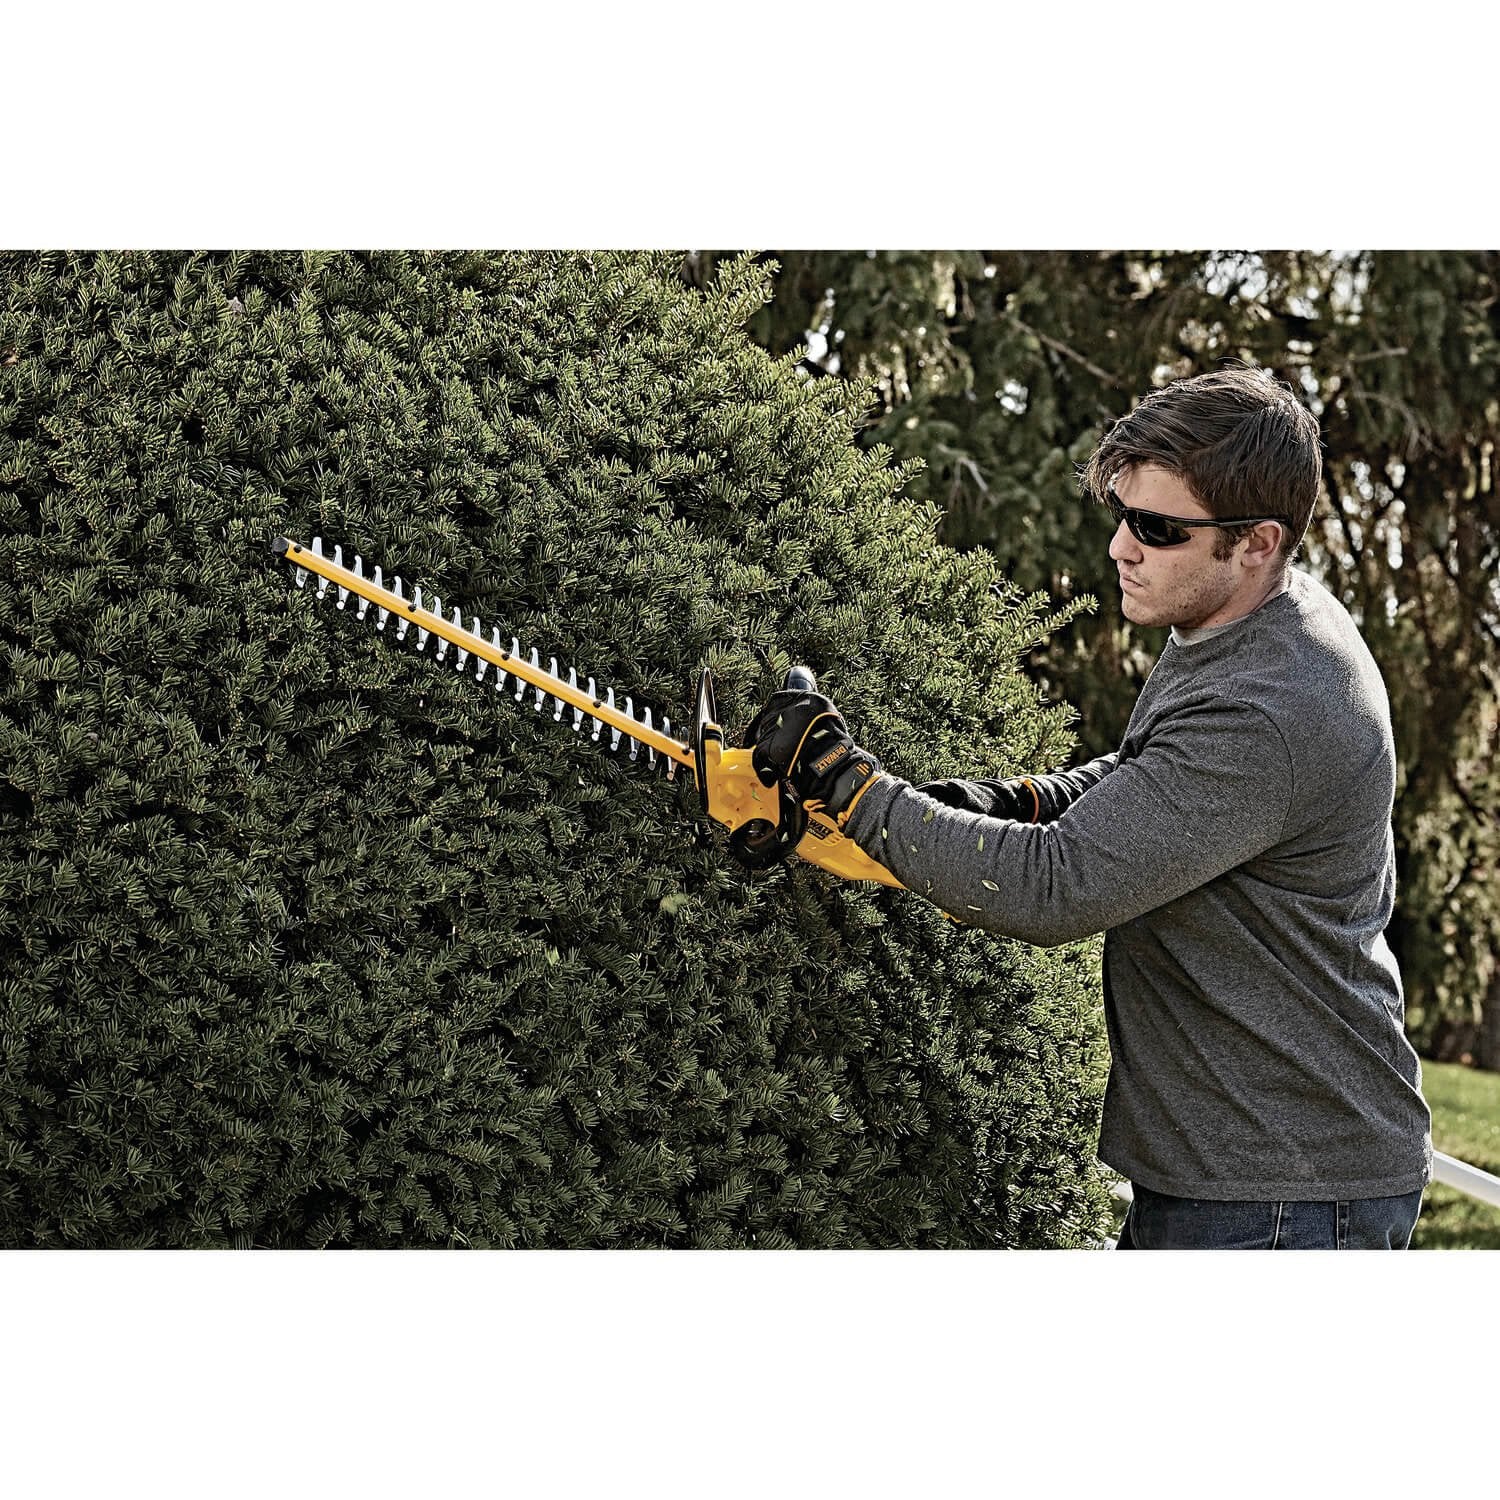 Dewalt DCHT820B - 20V MAX* LITHIUM ION 22” HEDGE TRIMMER - Tool Only